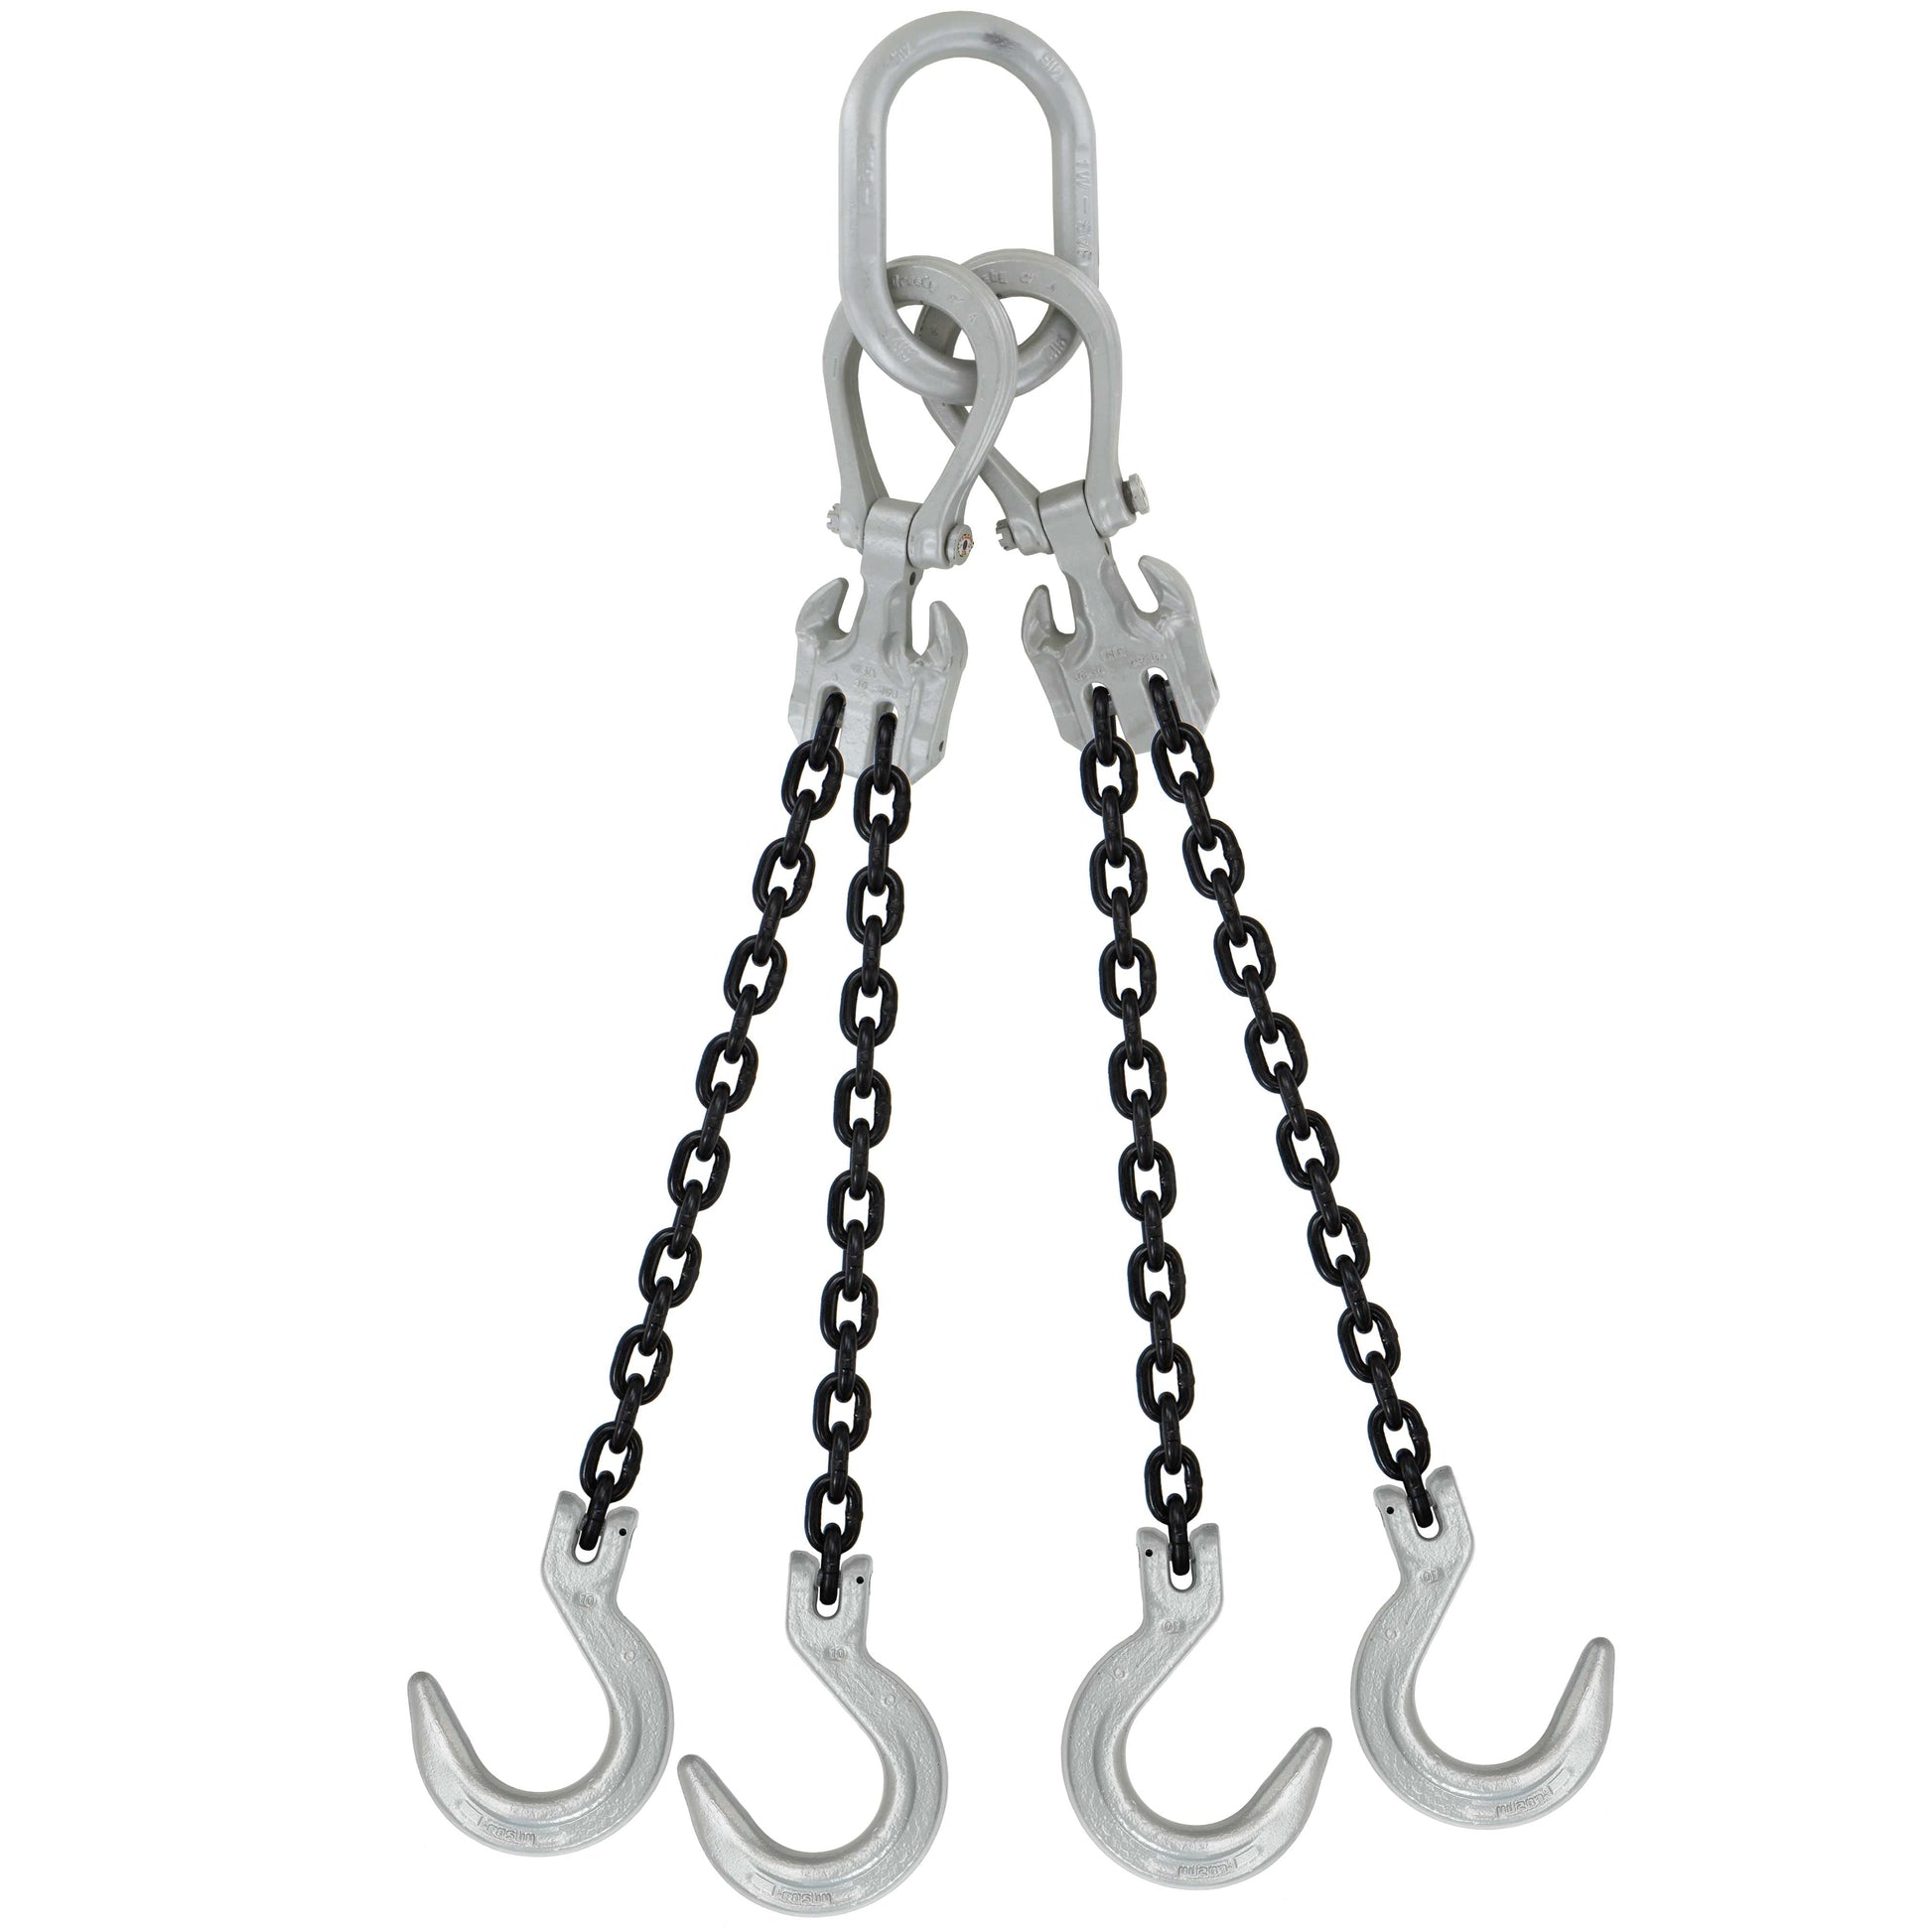 932 inch x 15 foot Domestic Adjustable 4 Leg Chain Sling w Crosby Foundry Hooks Grade 100 image 1 of 2